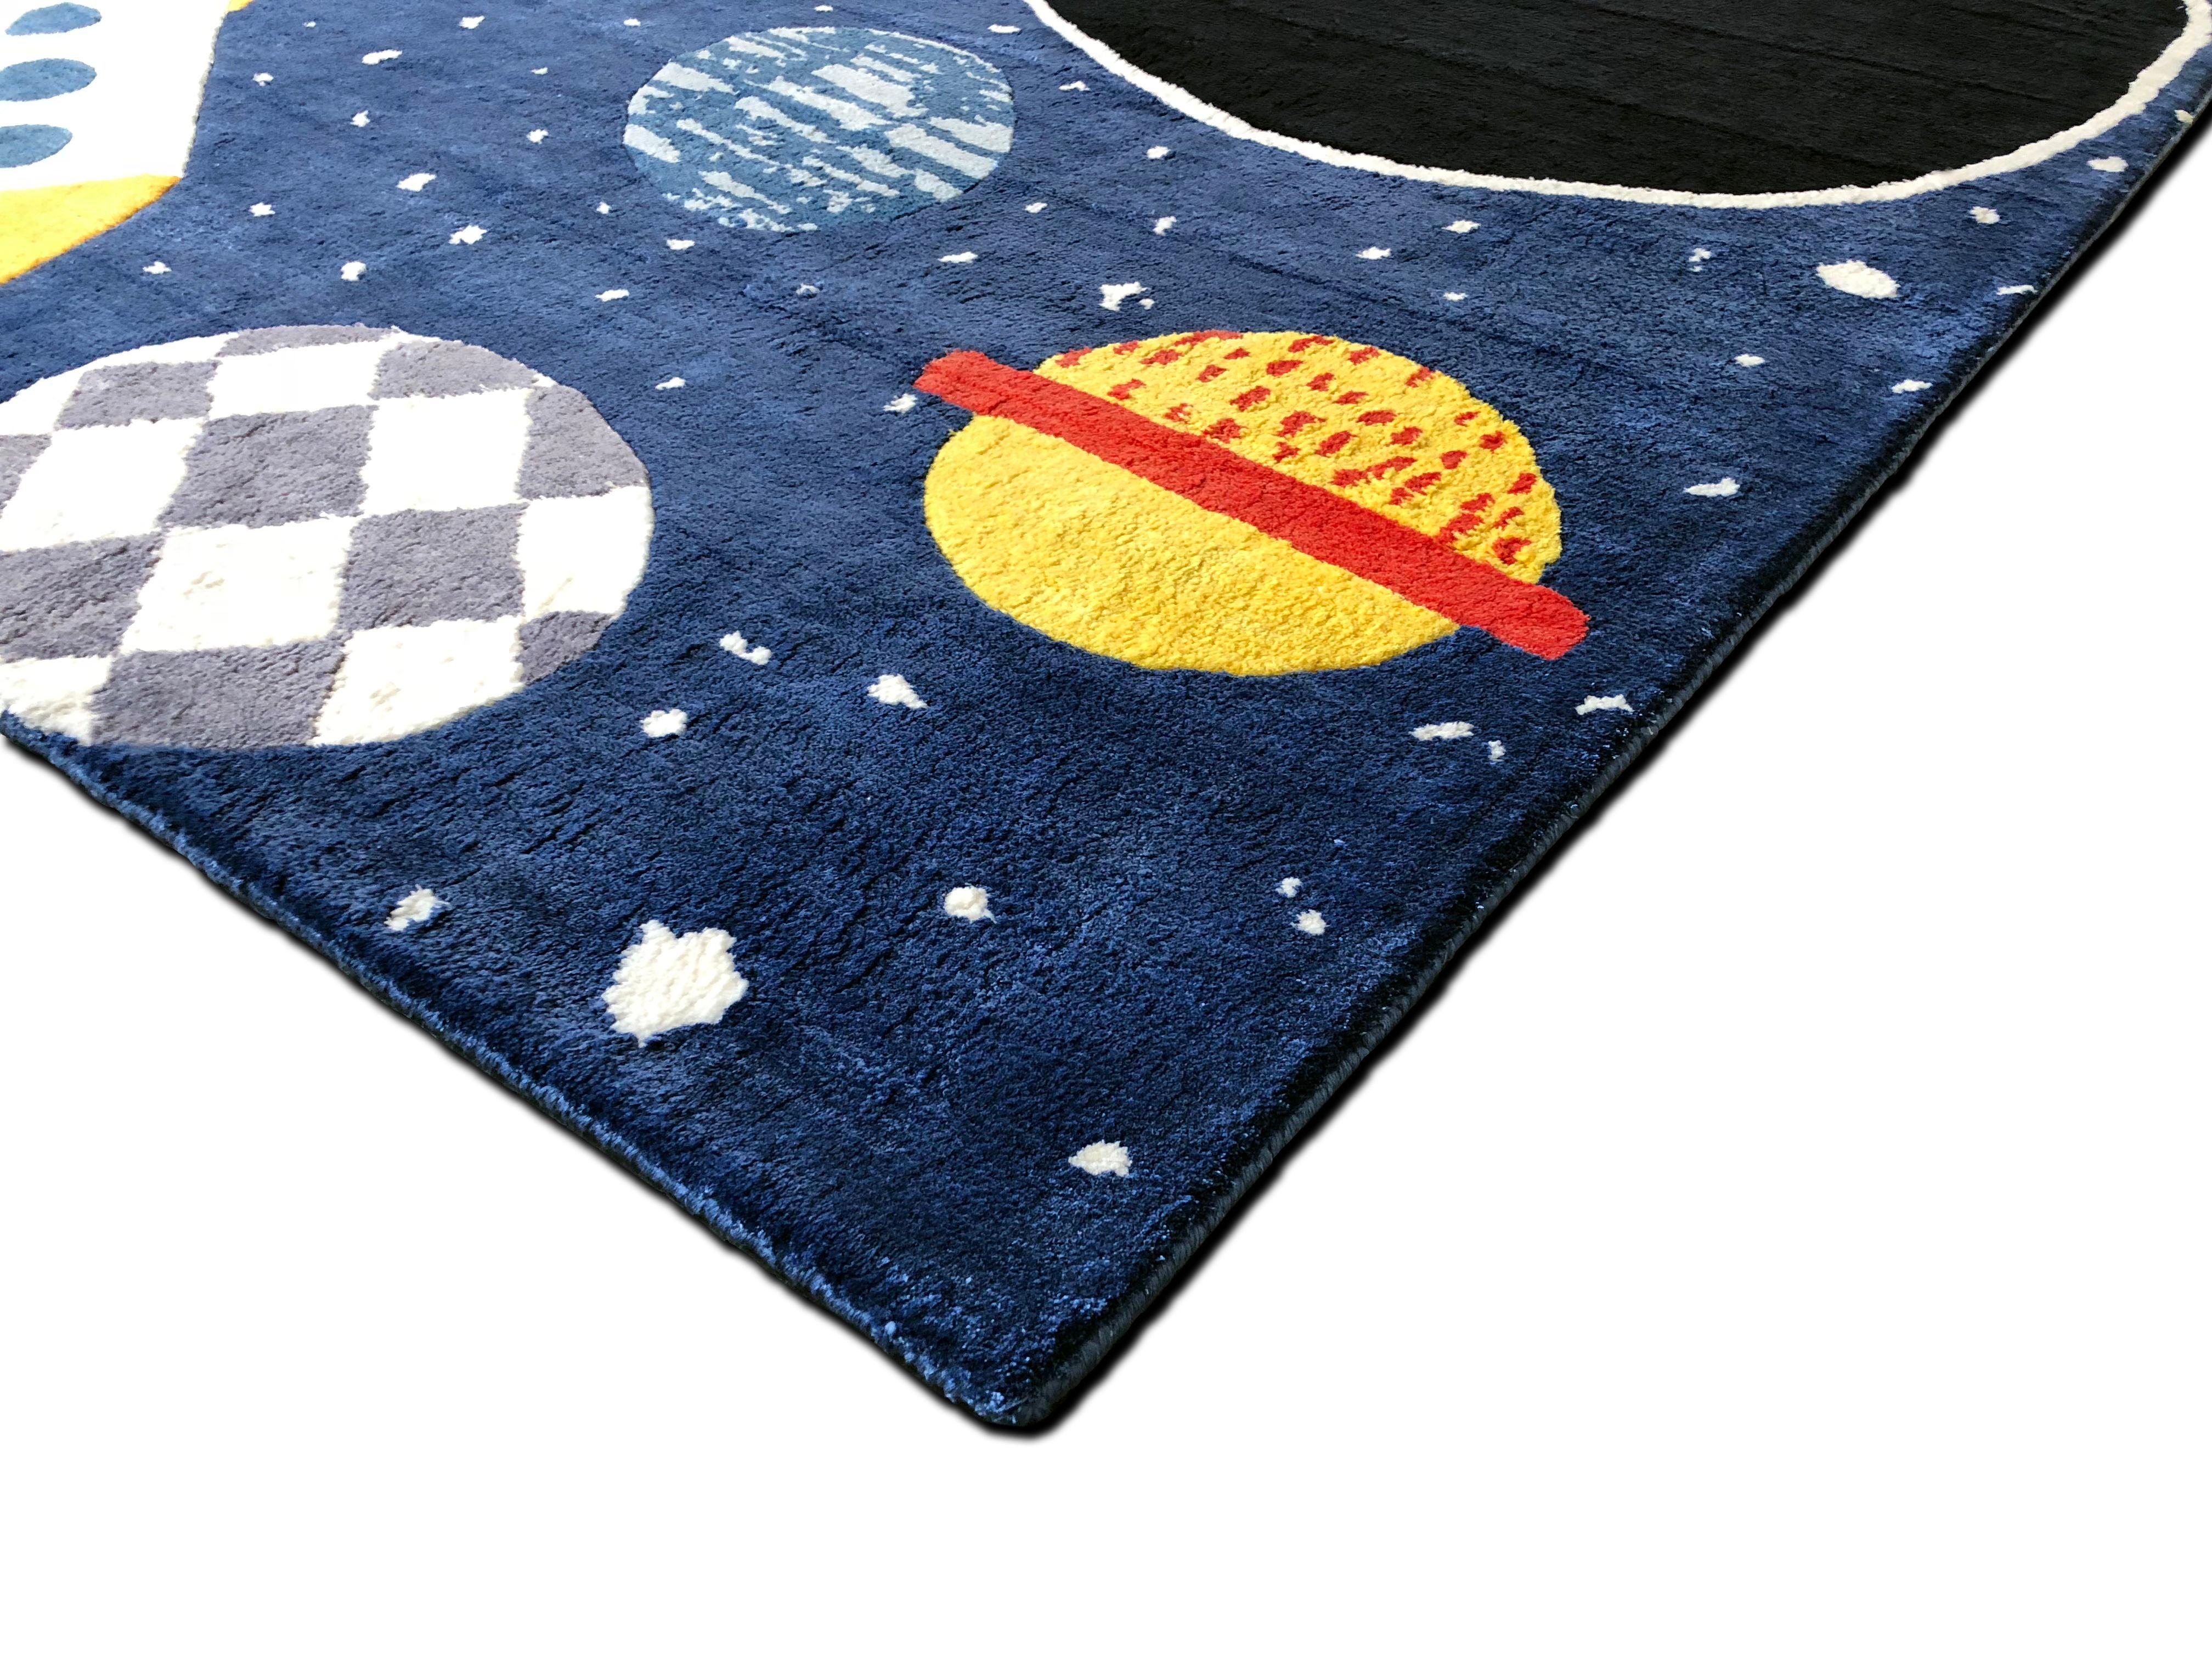 Space Ace Rug by Daria Solak, Hand Knotted, 100% New Zealand Wool 250x312cm In New Condition For Sale In London, GB